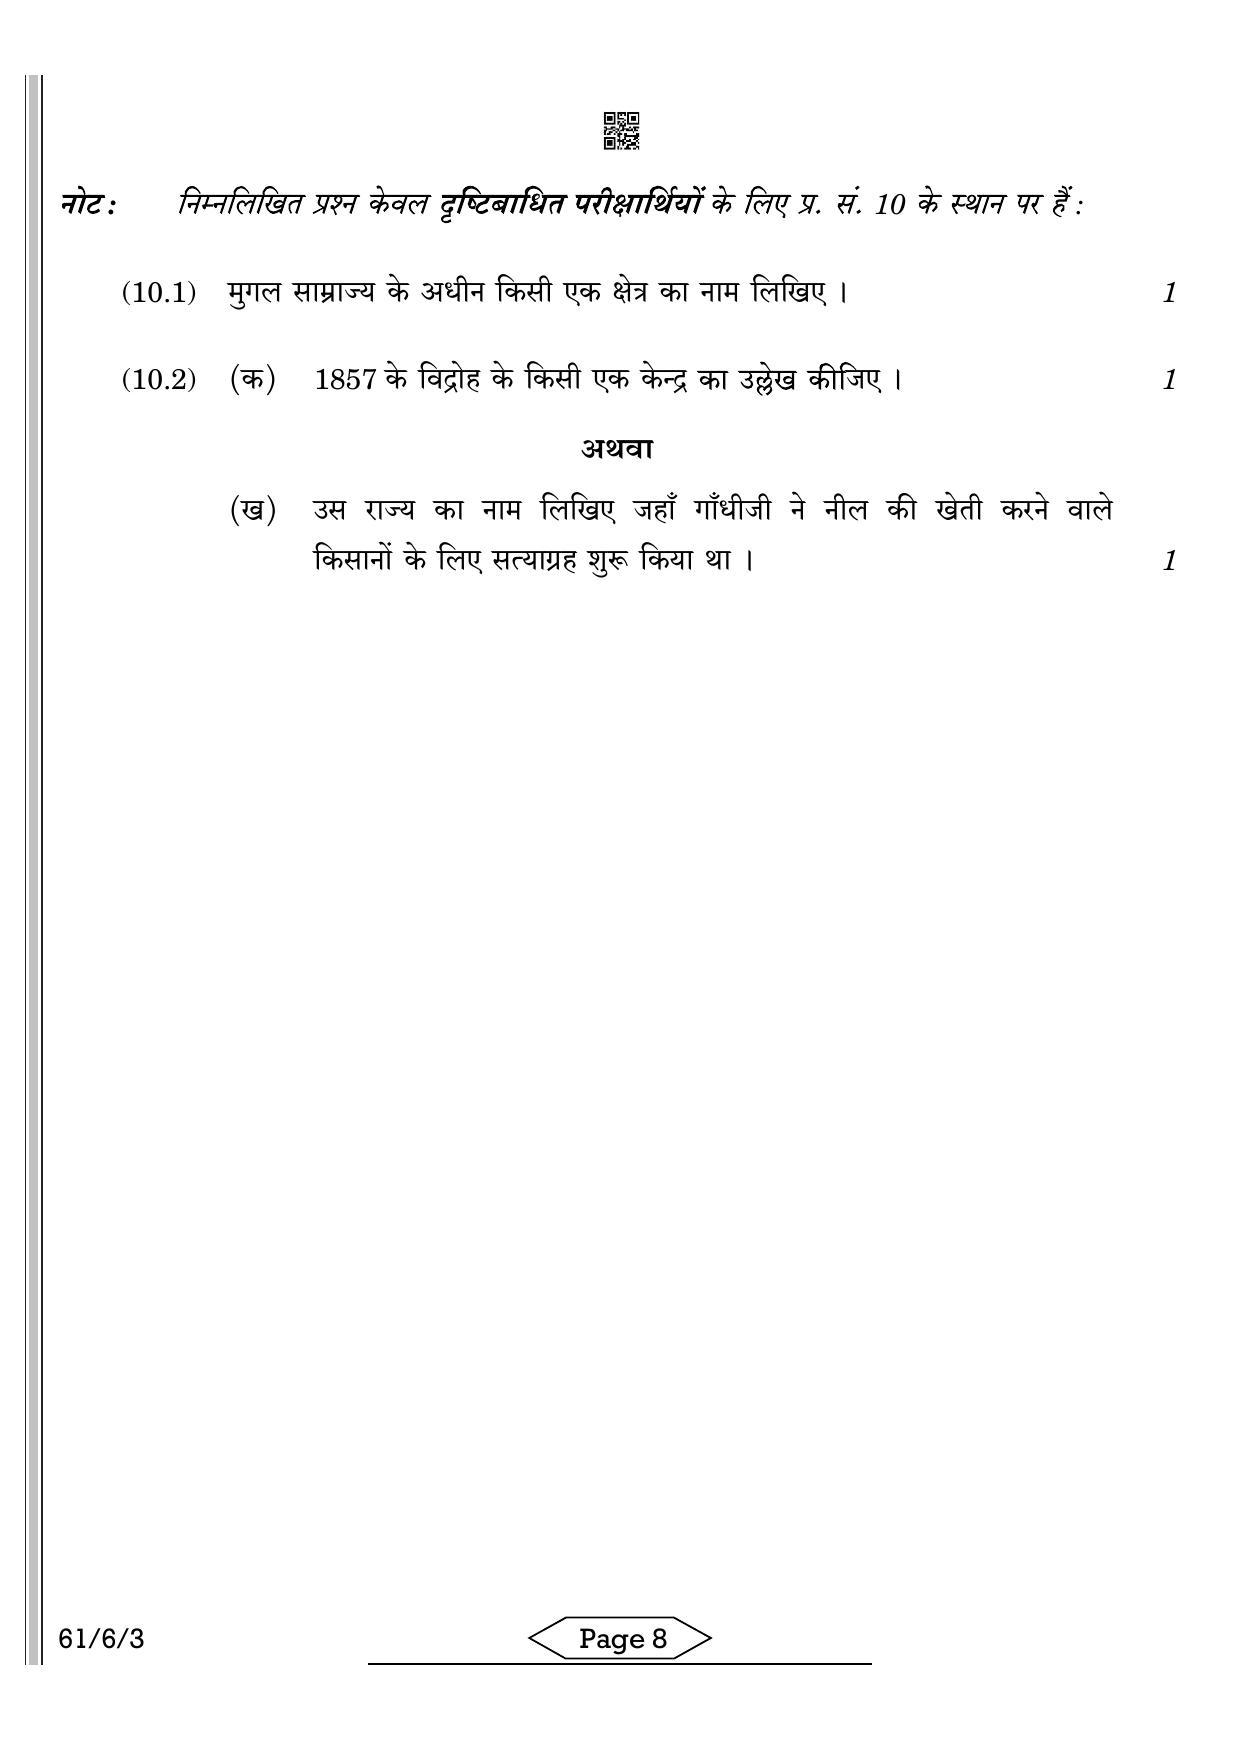 CBSE Class 12 61-6-3 HISTORY 2022 Compartment Question Paper - Page 8